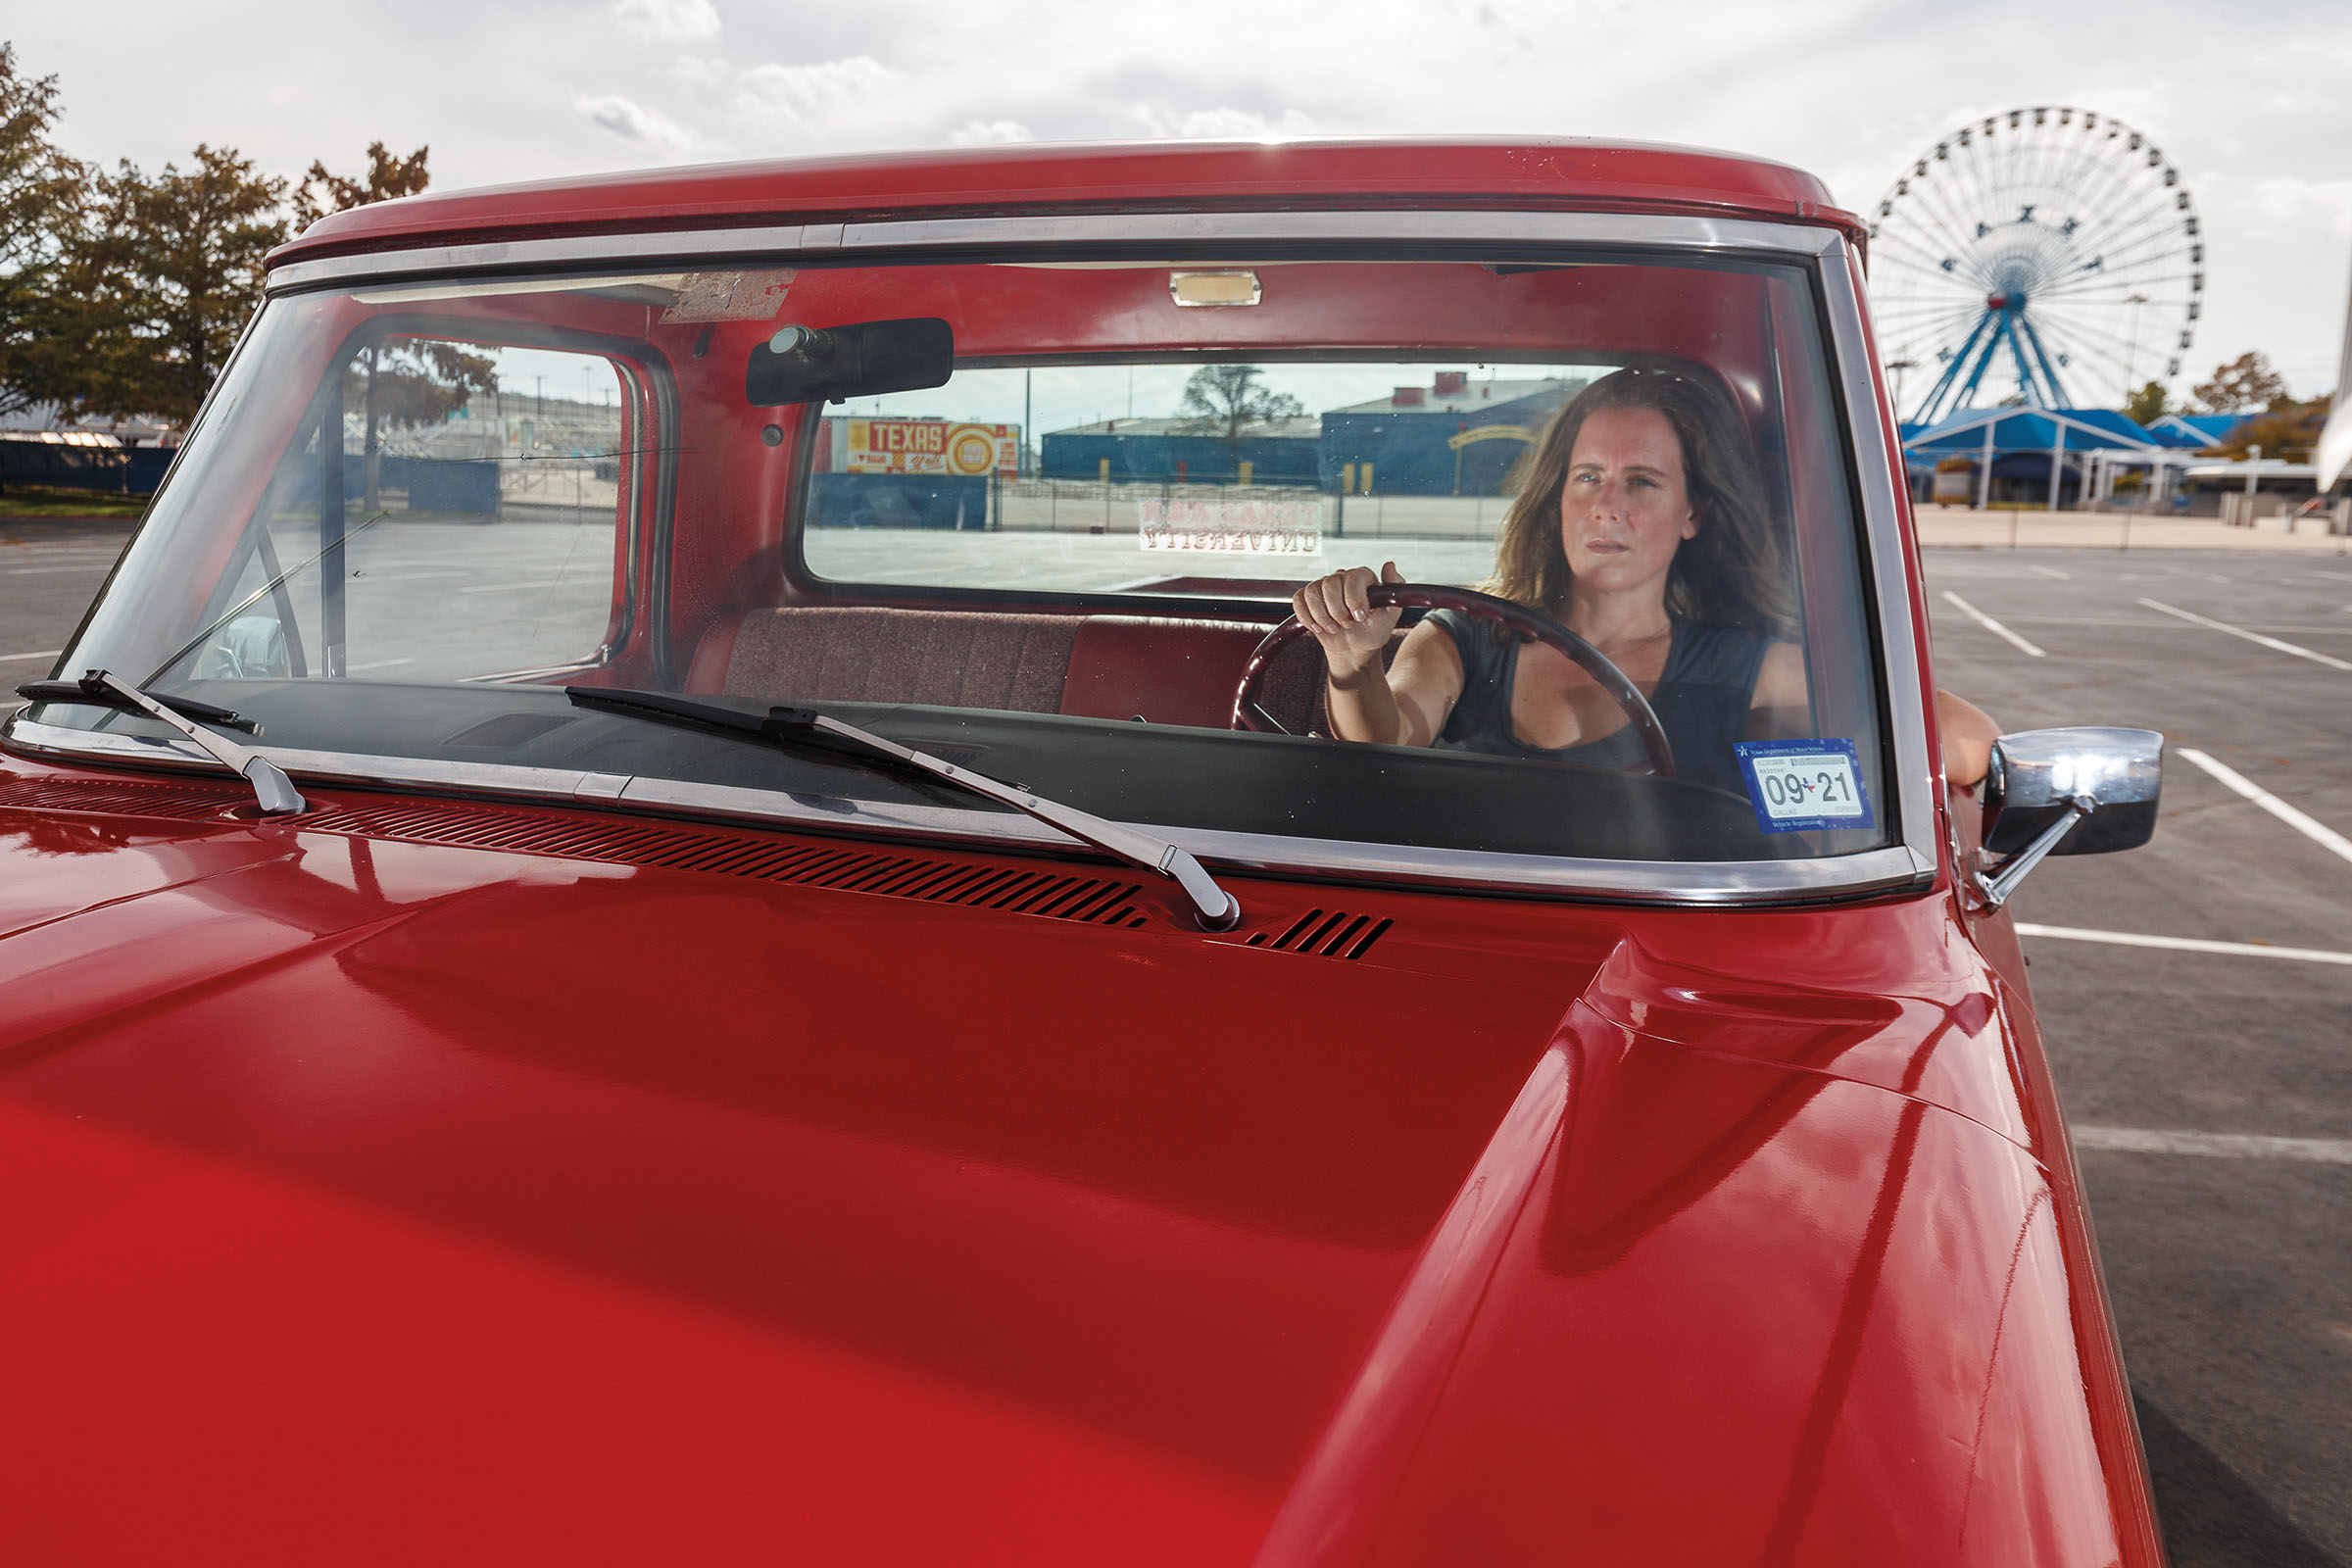 A woman drives a bright red Ford truck with the ferris wheel of Dallas' Fair Park in the background